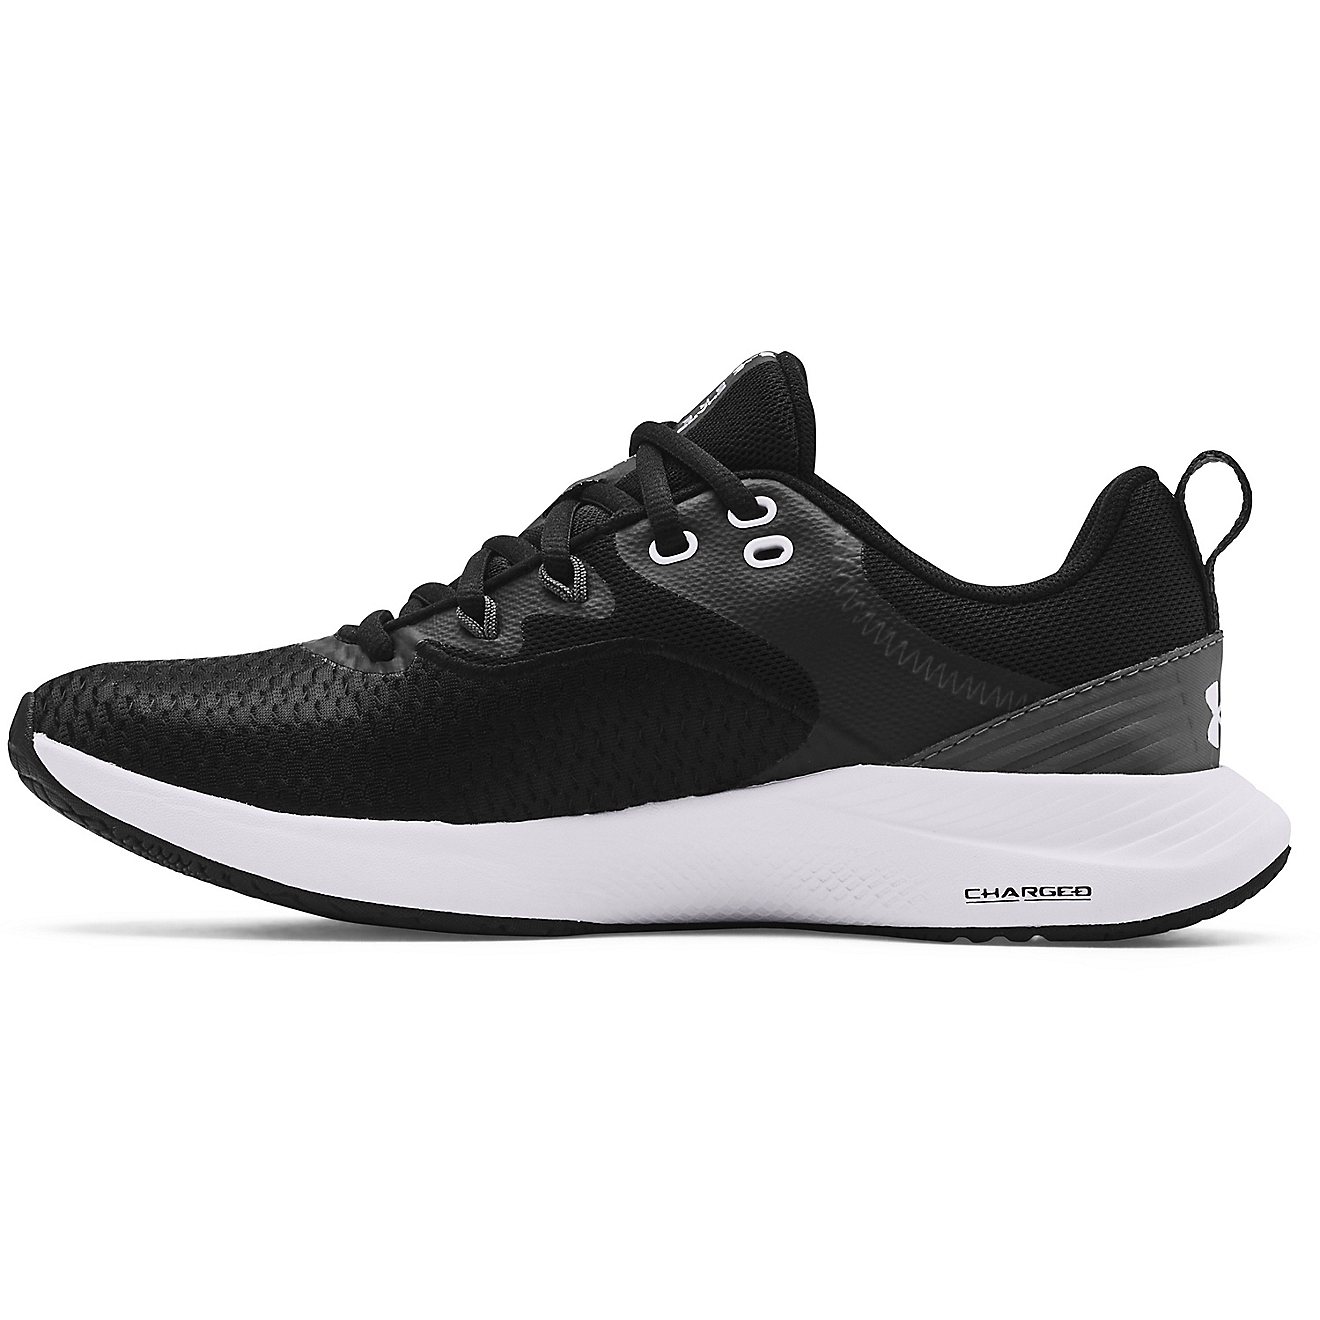 Under Armour Women's Charged Breathe TR 3 Training Shoes | Academy